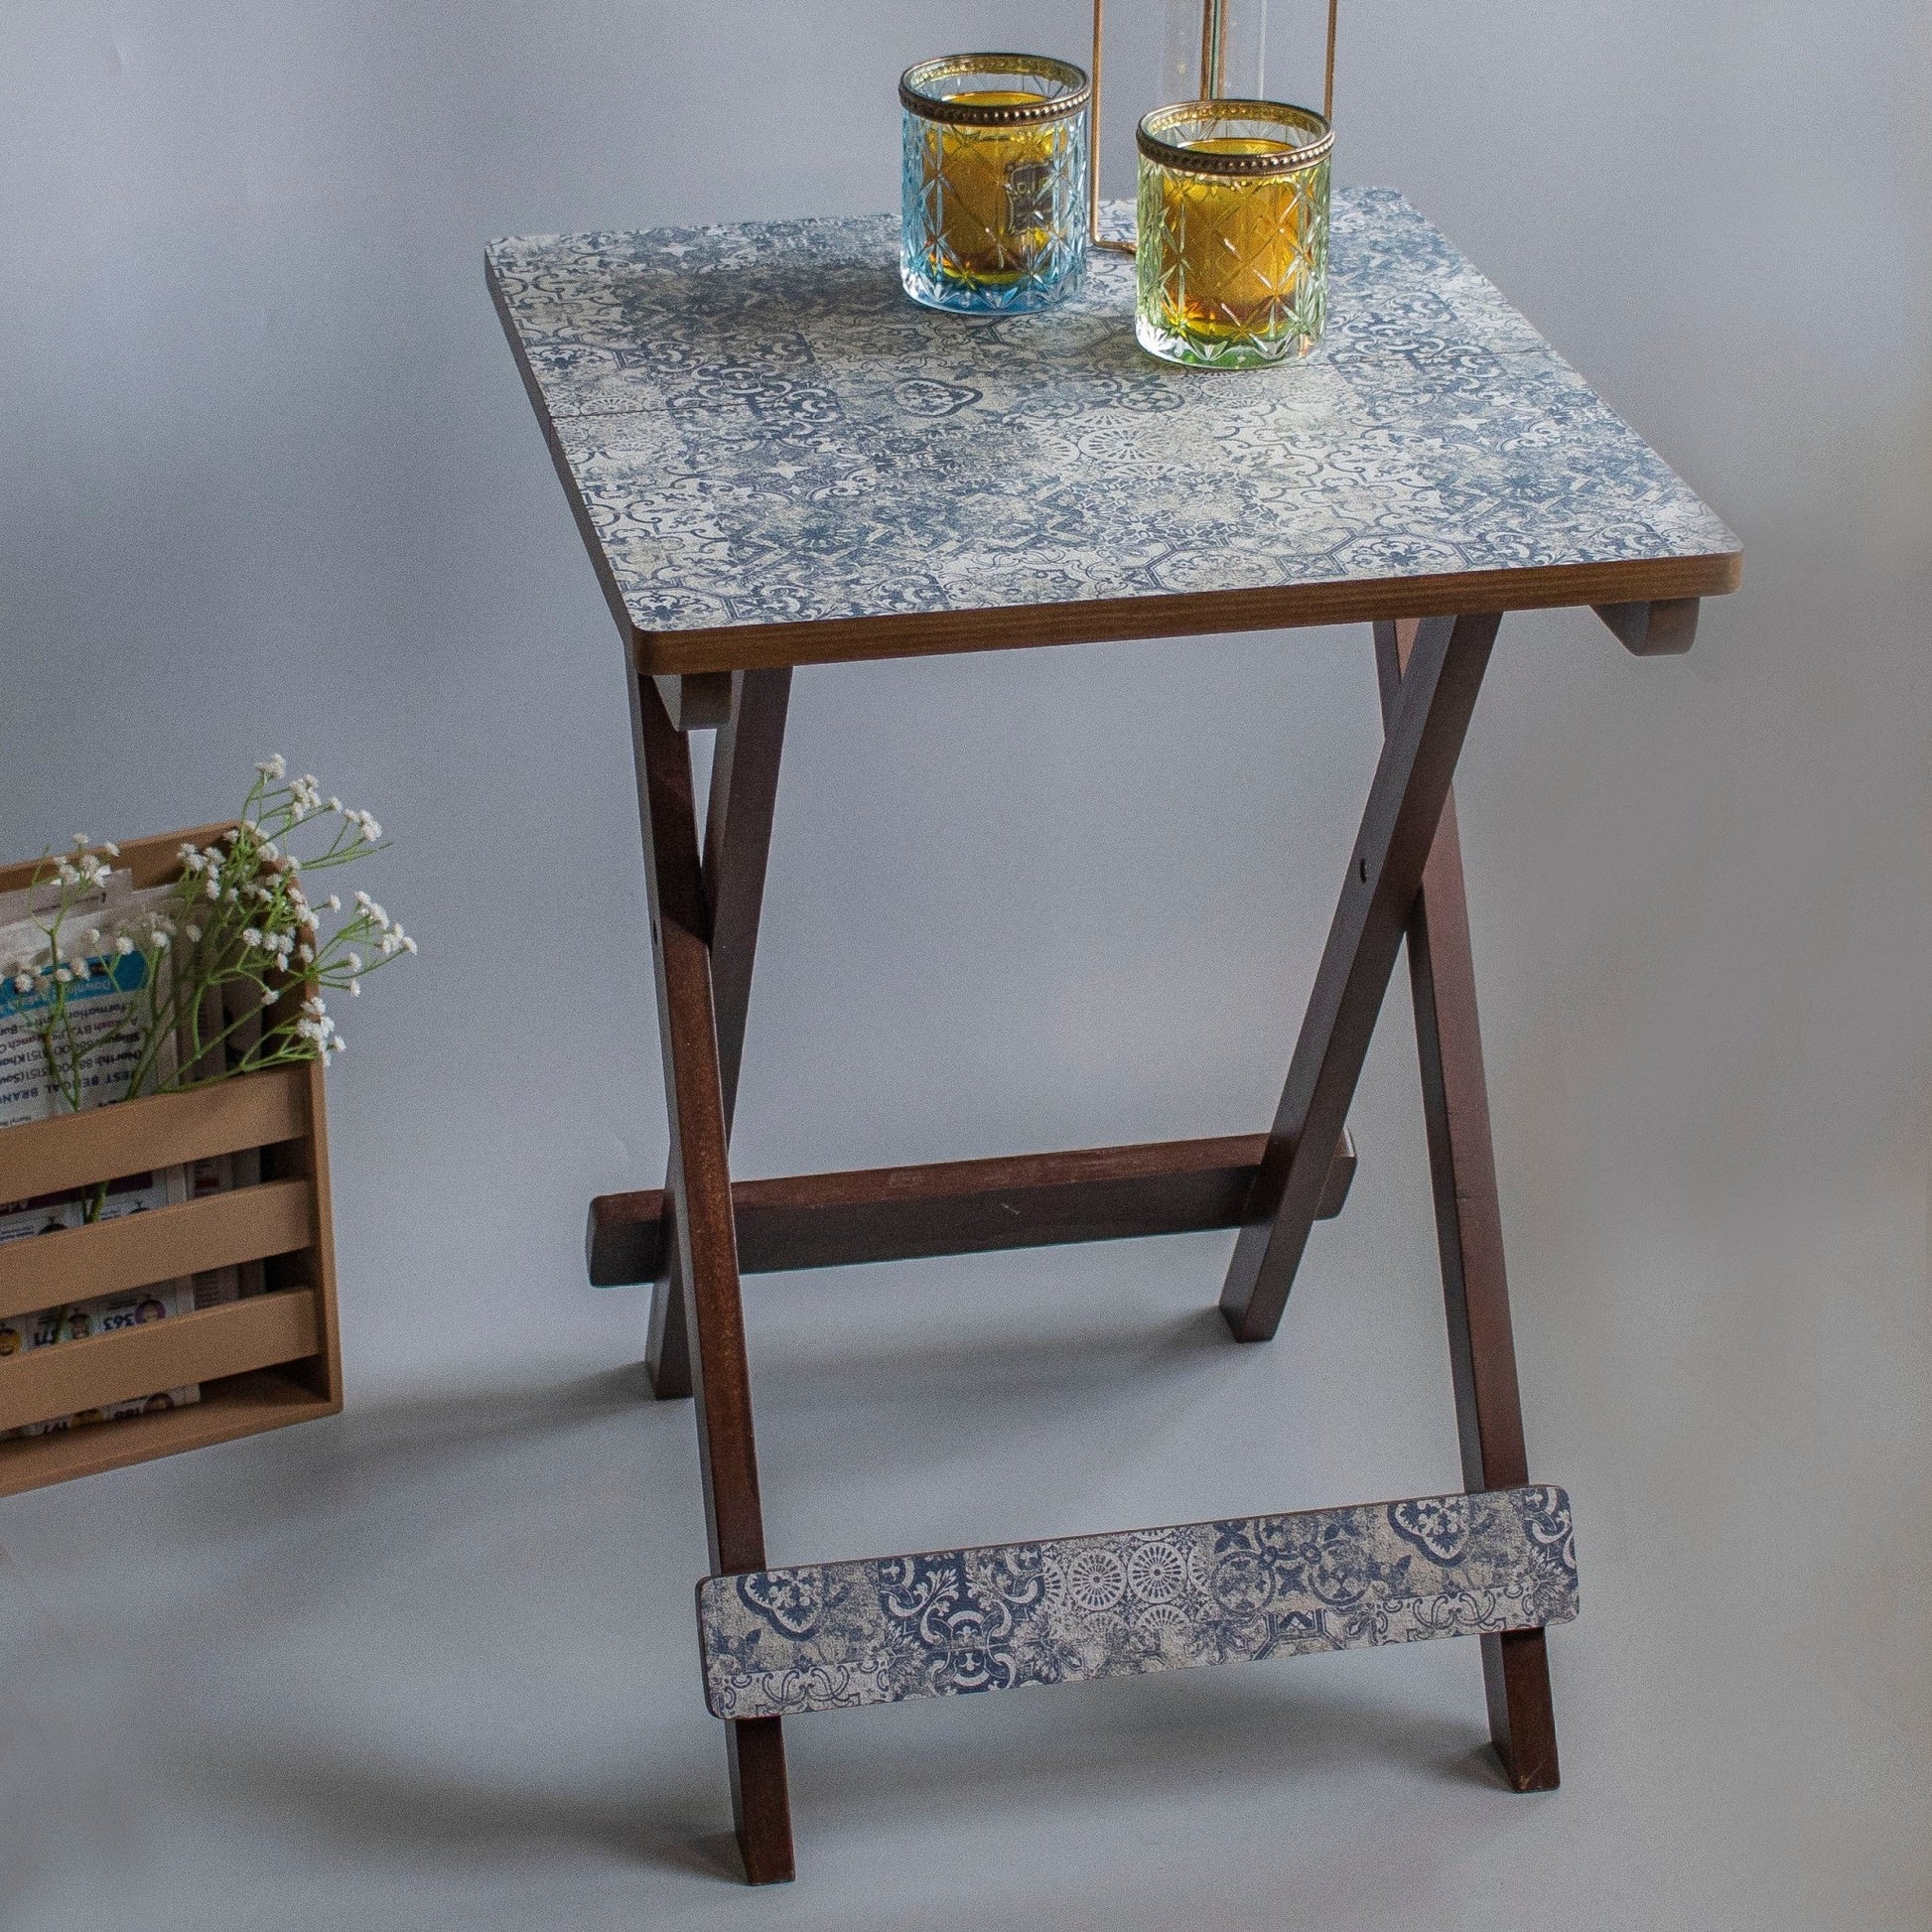 Shahi : Textured Foldable Tables - Ebony WoodcraftsFolding Tables, Side Tables, End Table